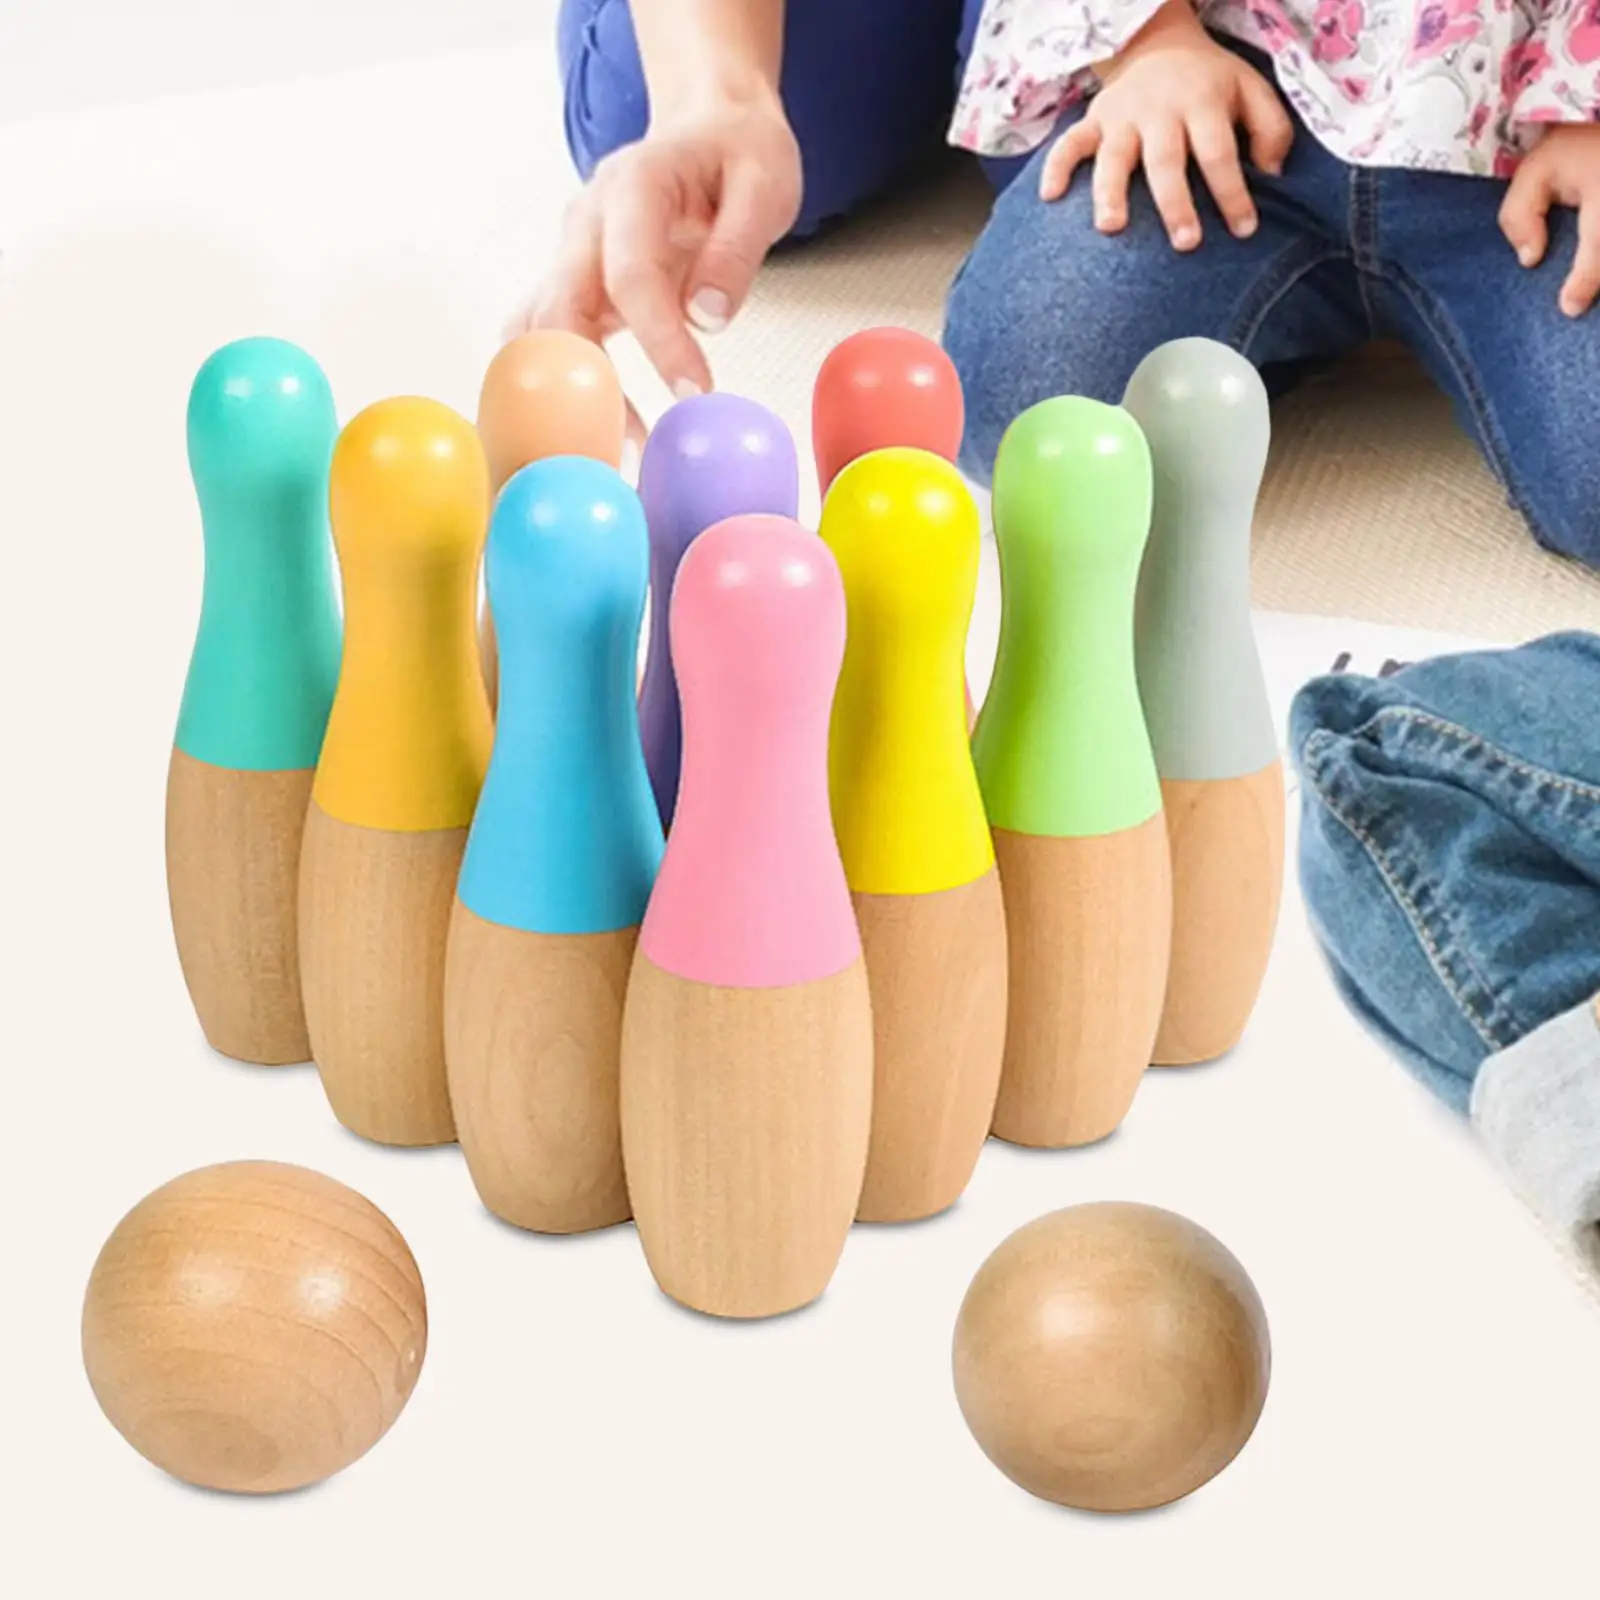 Kids Wooden Bowling Games Set , Birthday Party Gift with 10 Bowling Pins & 2 Balls